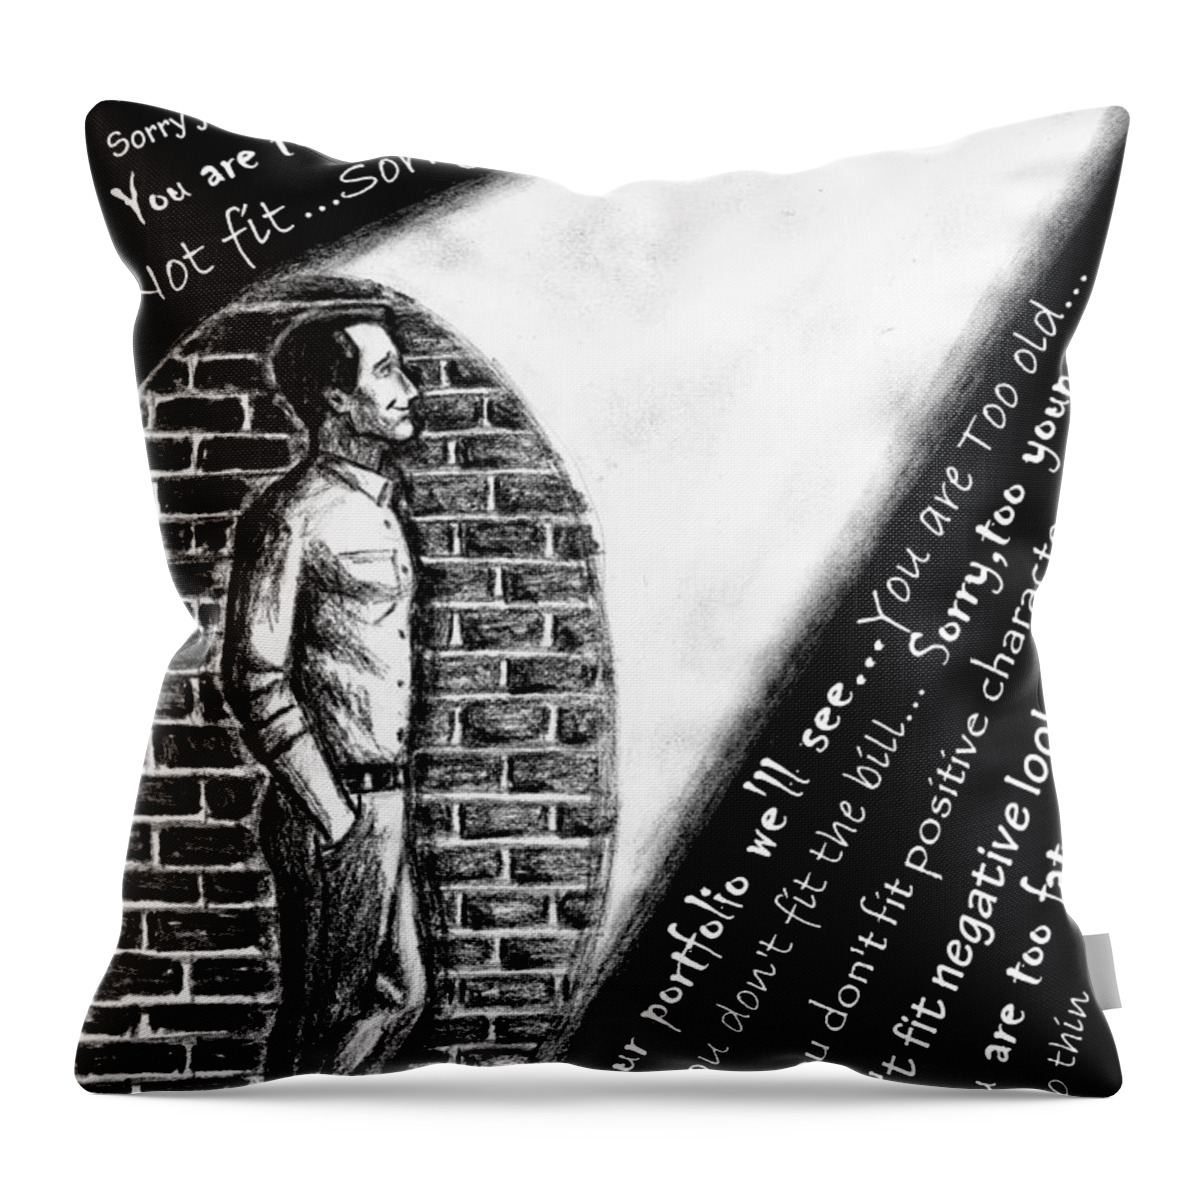 Wallpaper Buy Art Print Phone Case T-shirt Beautiful Duvet Case Pillow Tote Bags Shower Curtain Greeting Cards Mobile Phone Apple Android Struggling Actor Bollywood Hollywood Charcoal Facing Rejection Thoughtful Hope Ray Of Light Optimism Optimistic Salman Ravish Black White Throw Pillow featuring the drawing Struggling Actor by Salman Ravish